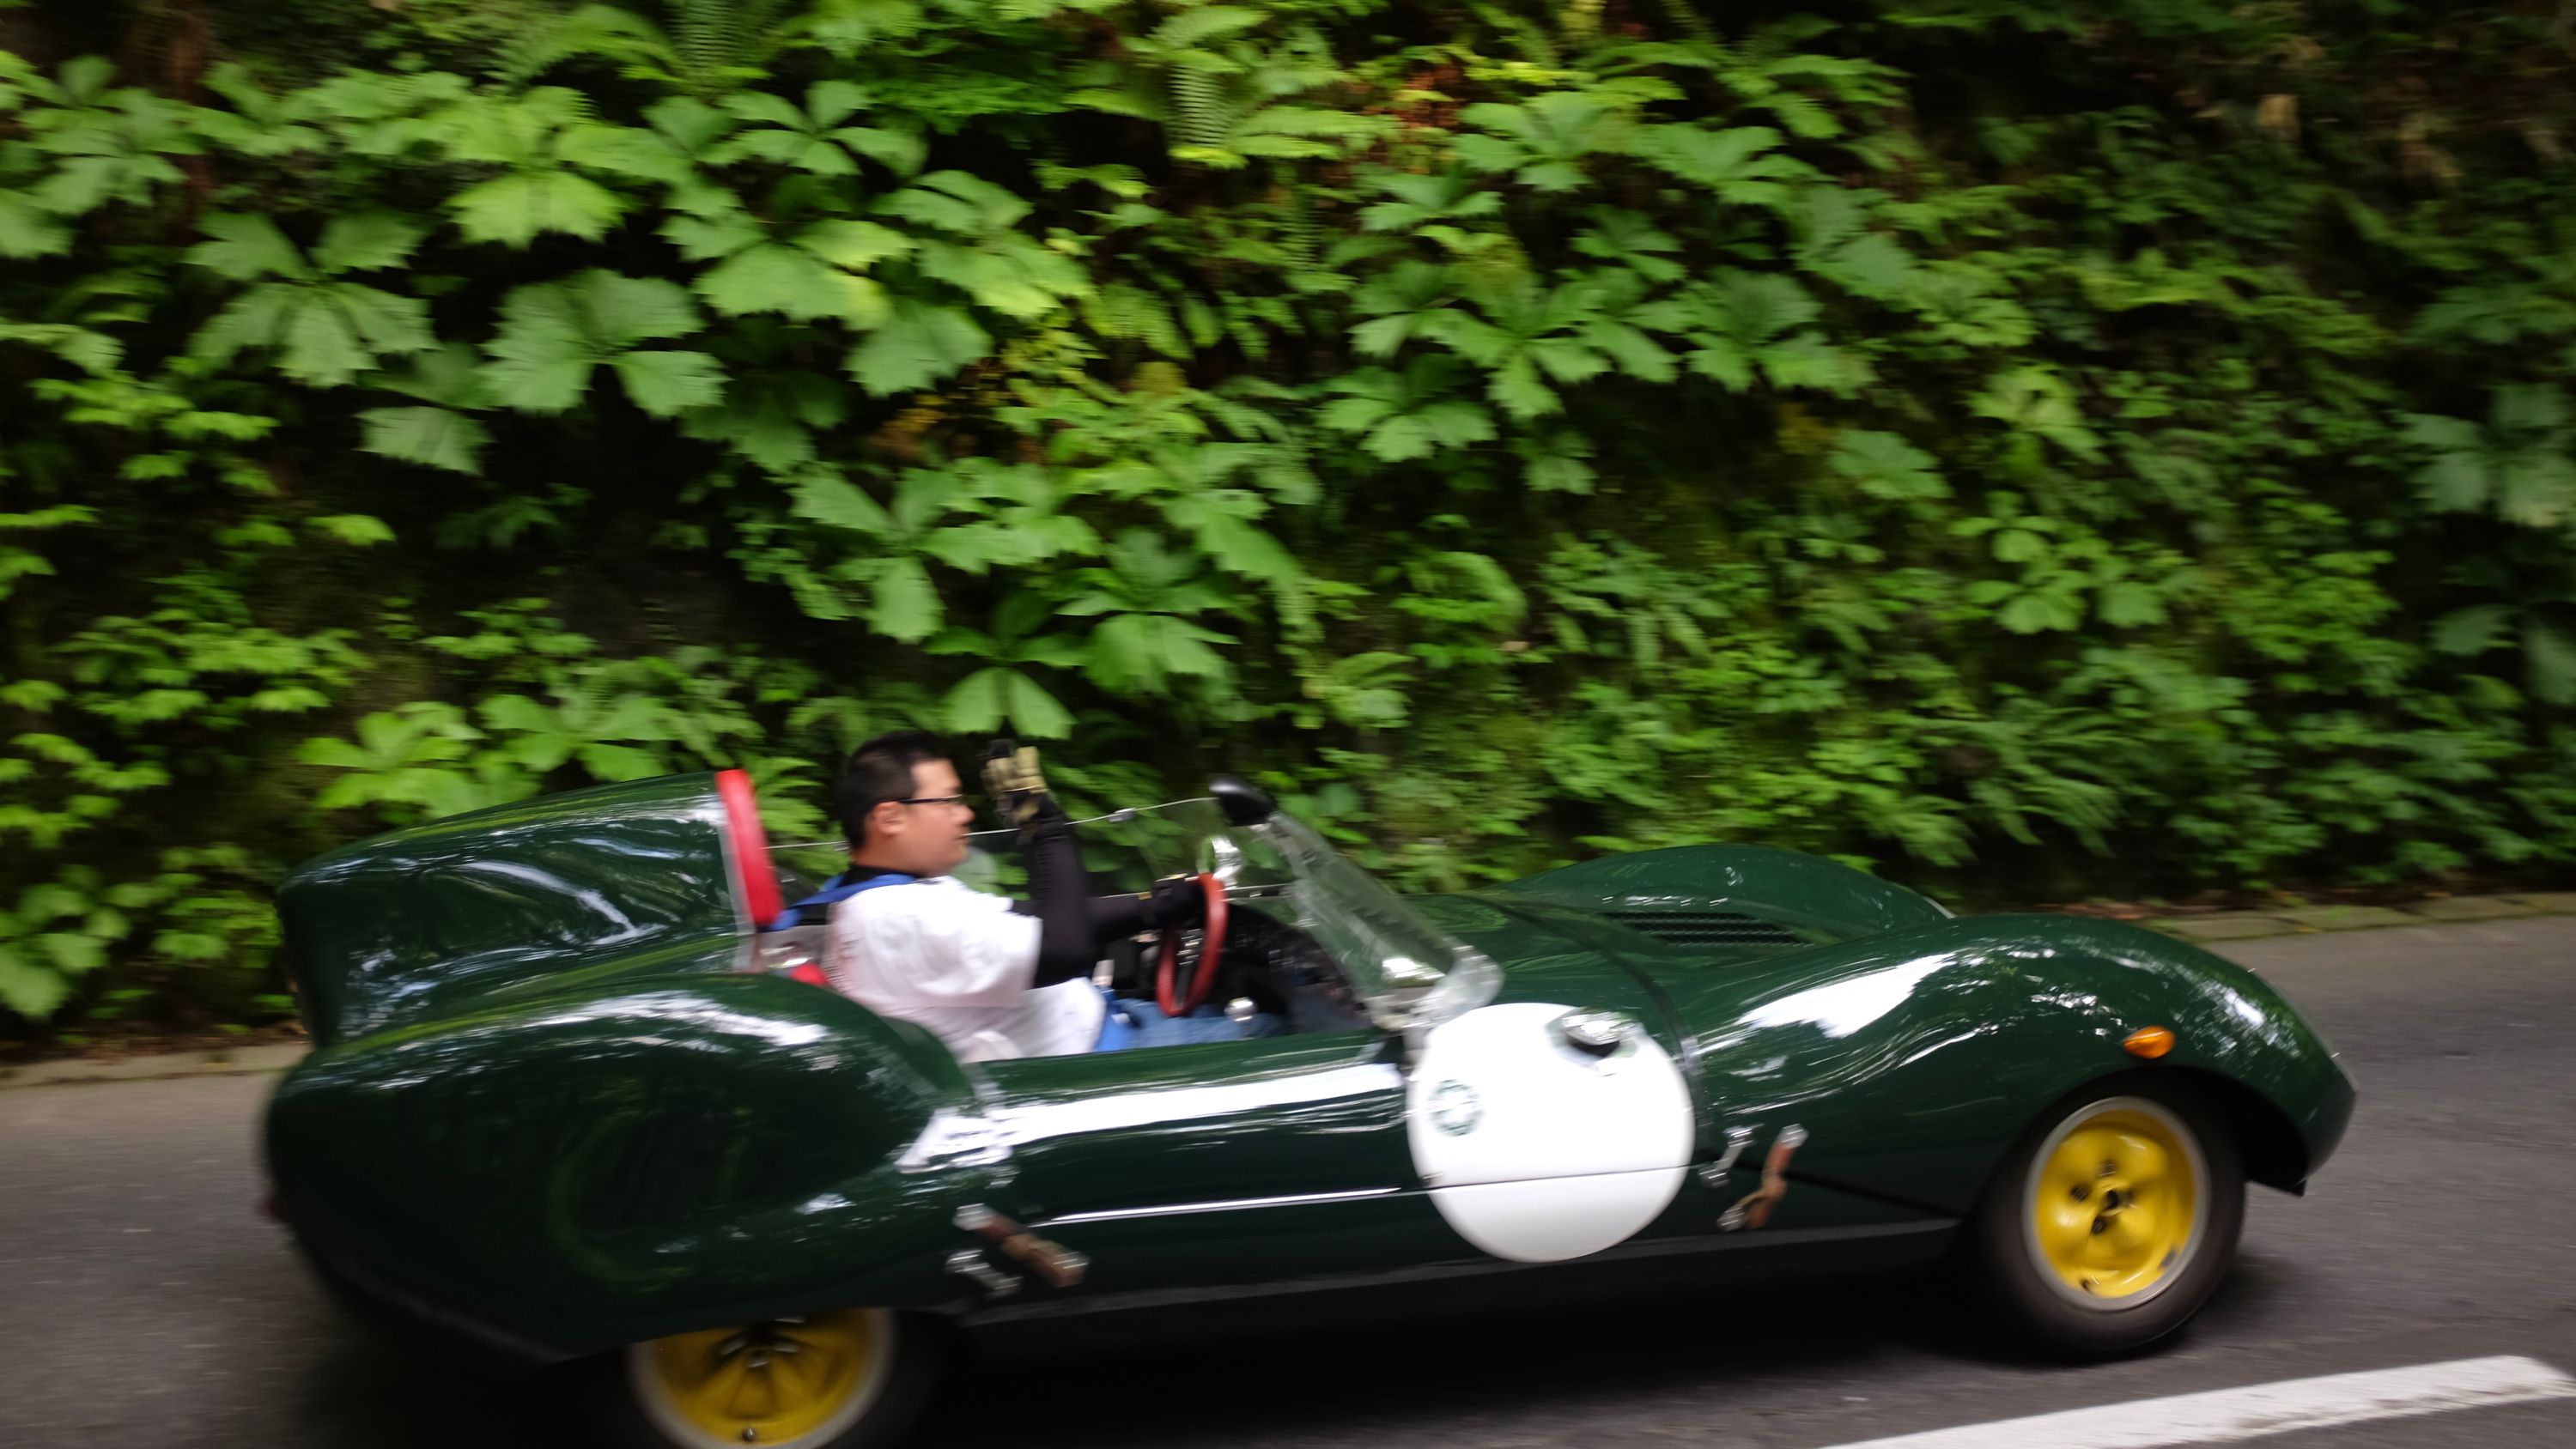 A man drives a low-slung green sports car, a Lotus Eleven, on a forest road.